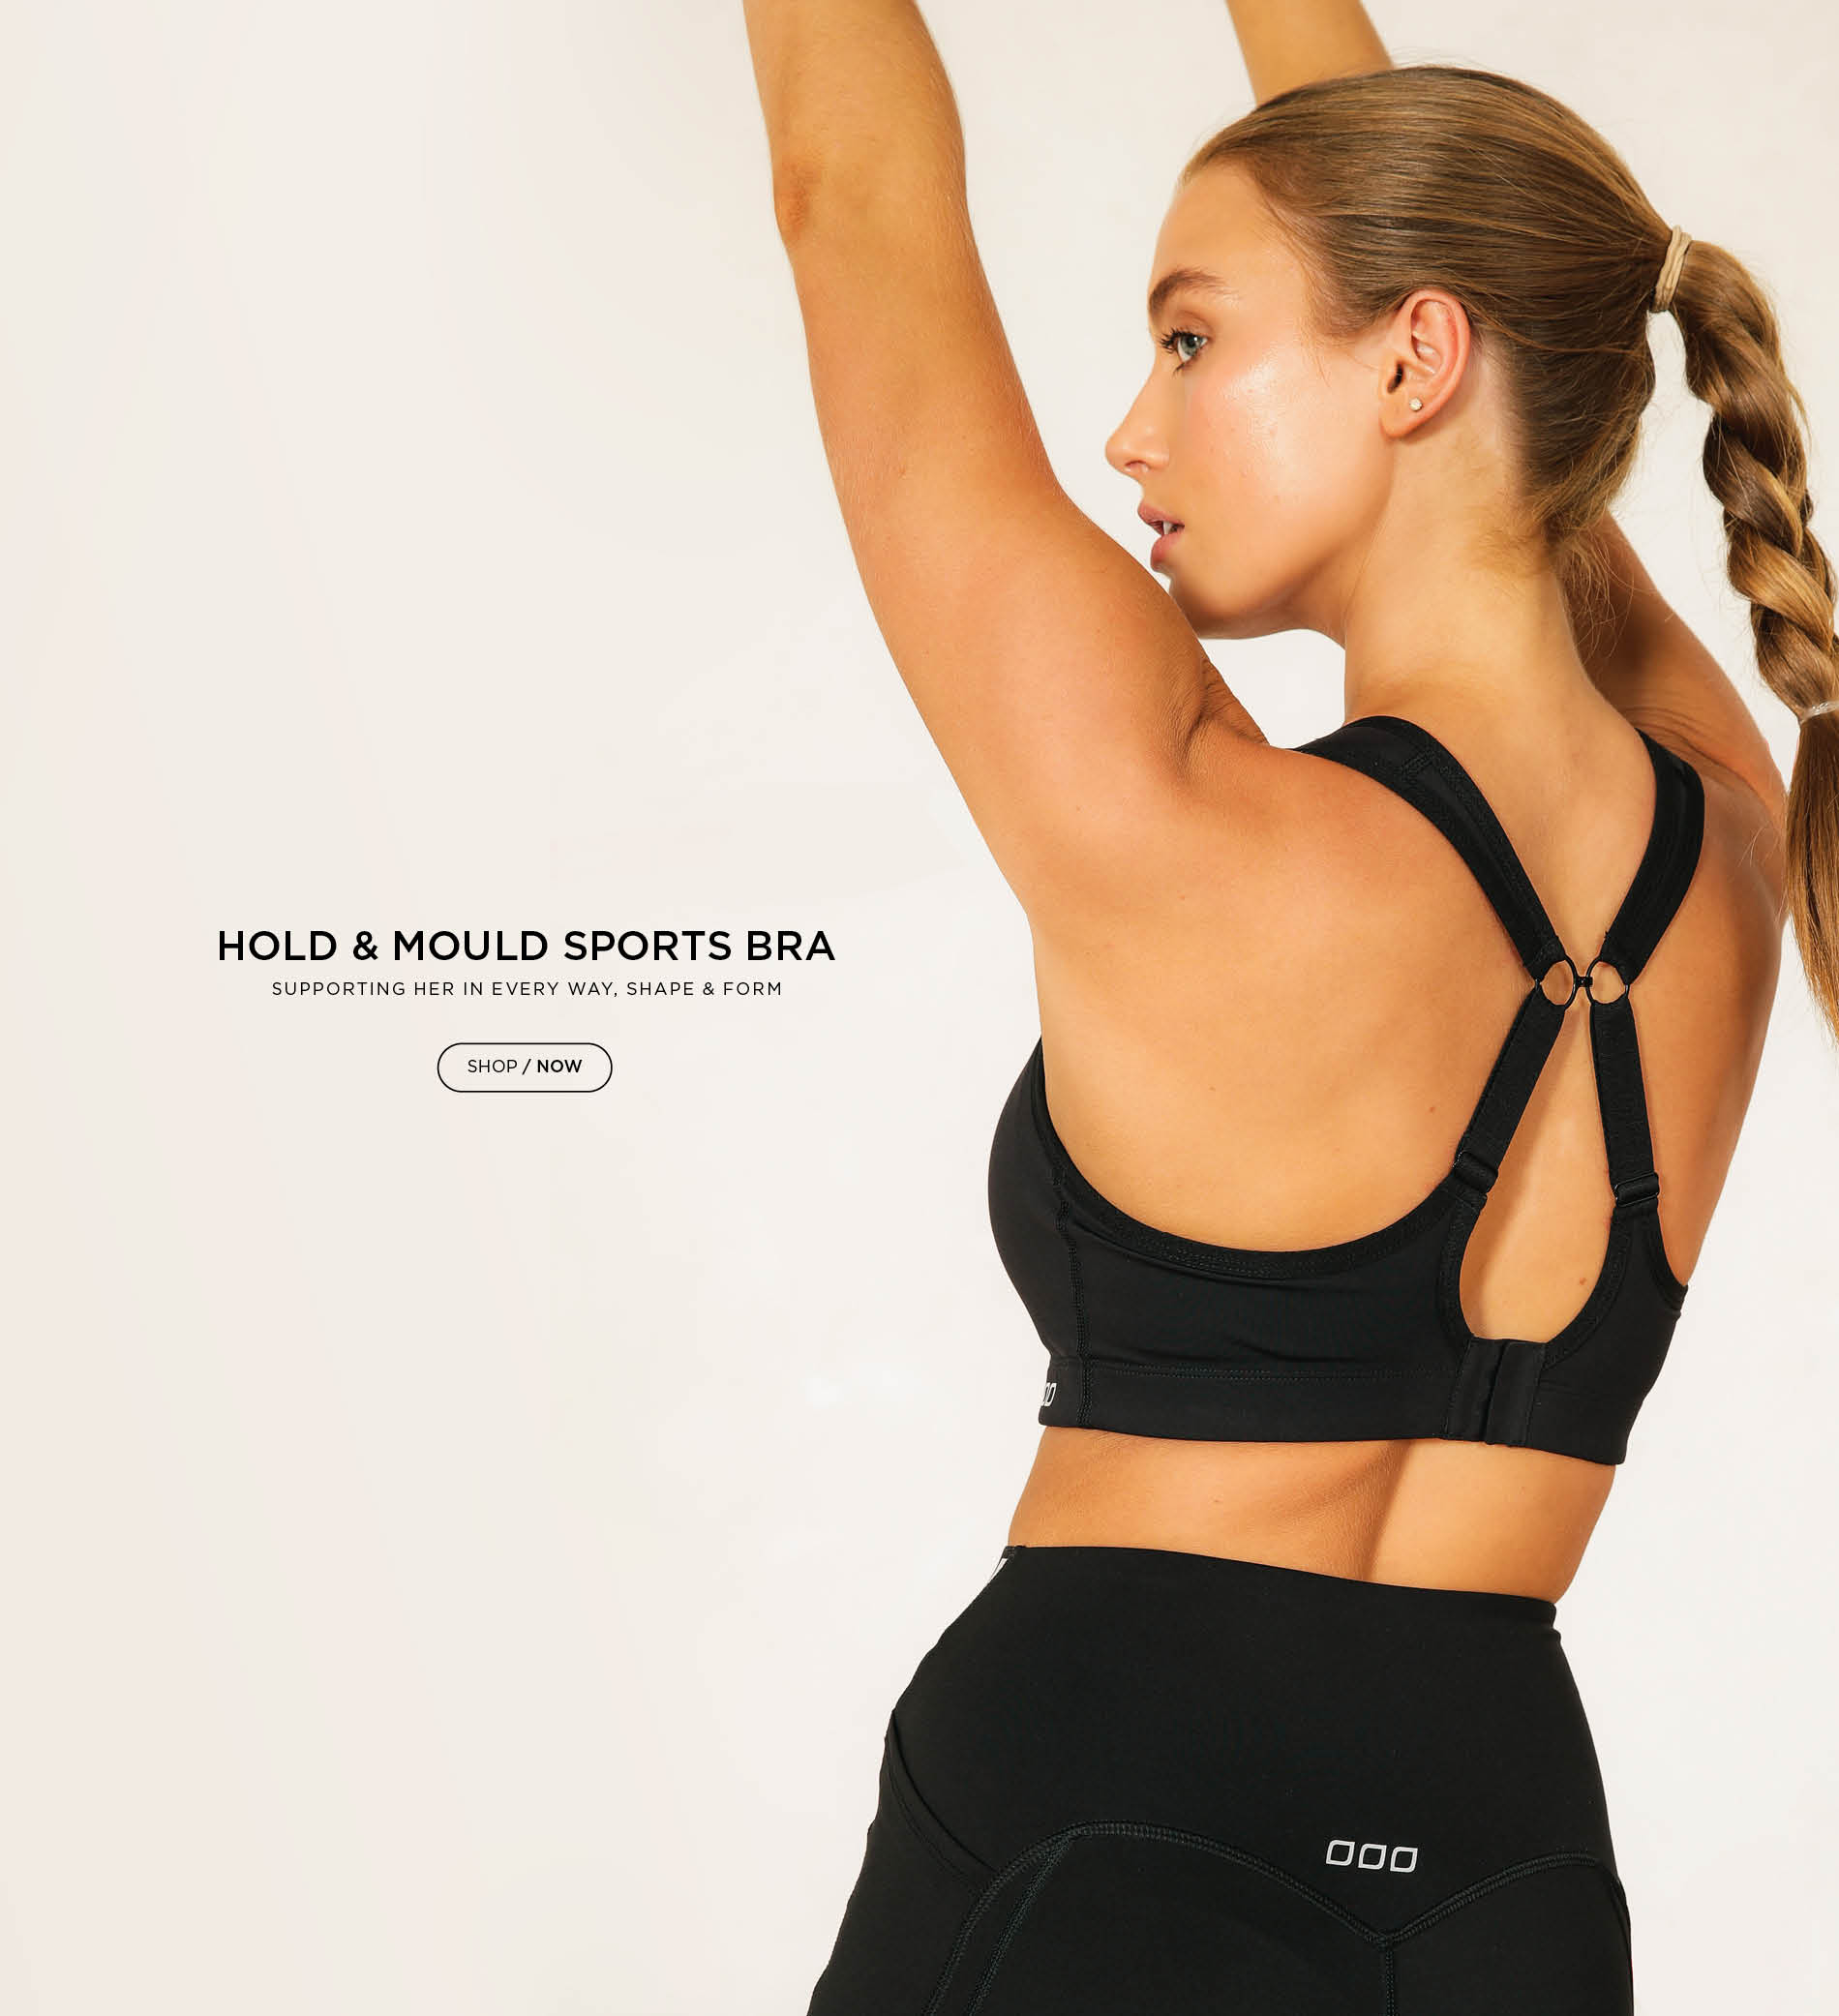 Hold & Mould Sports Bra. For all your workout needs